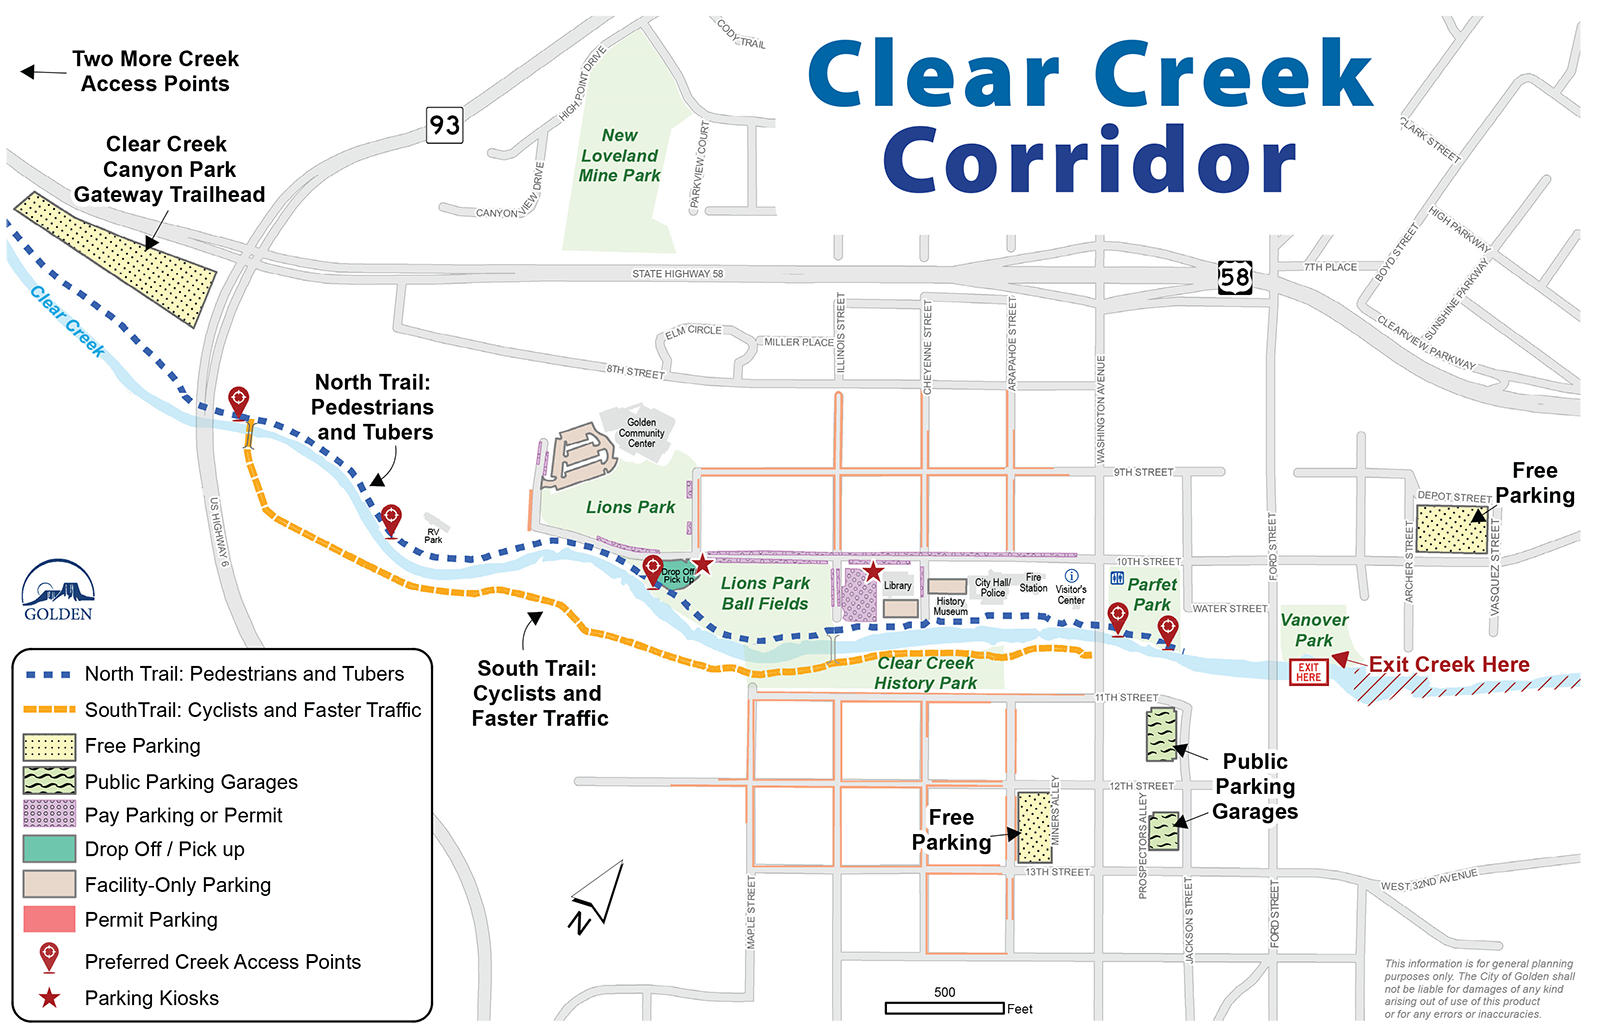 Clear Creek Corridor Parking and Use Map